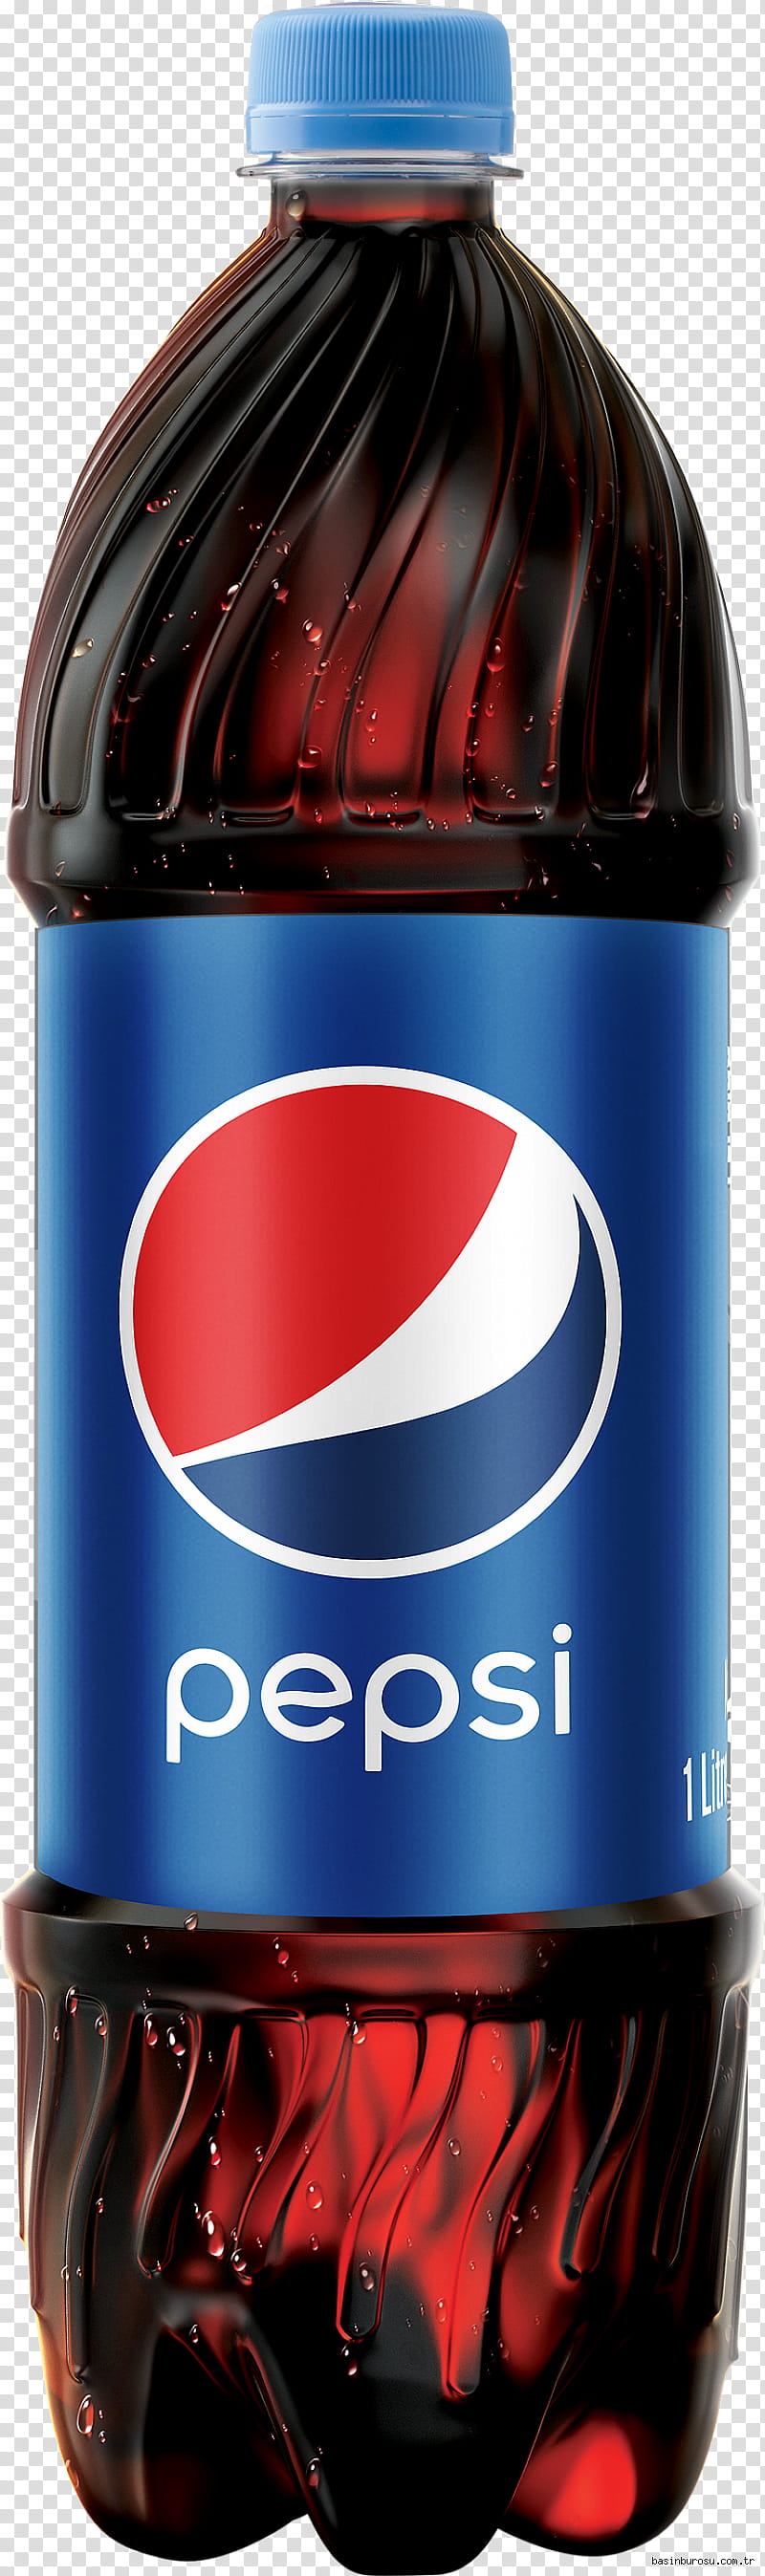 Coke Can, Fizzy Drinks, Pepsi, Cocacola, Pepsi One, Diet Coke, Pepsi Max, PepsiCo transparent background PNG clipart